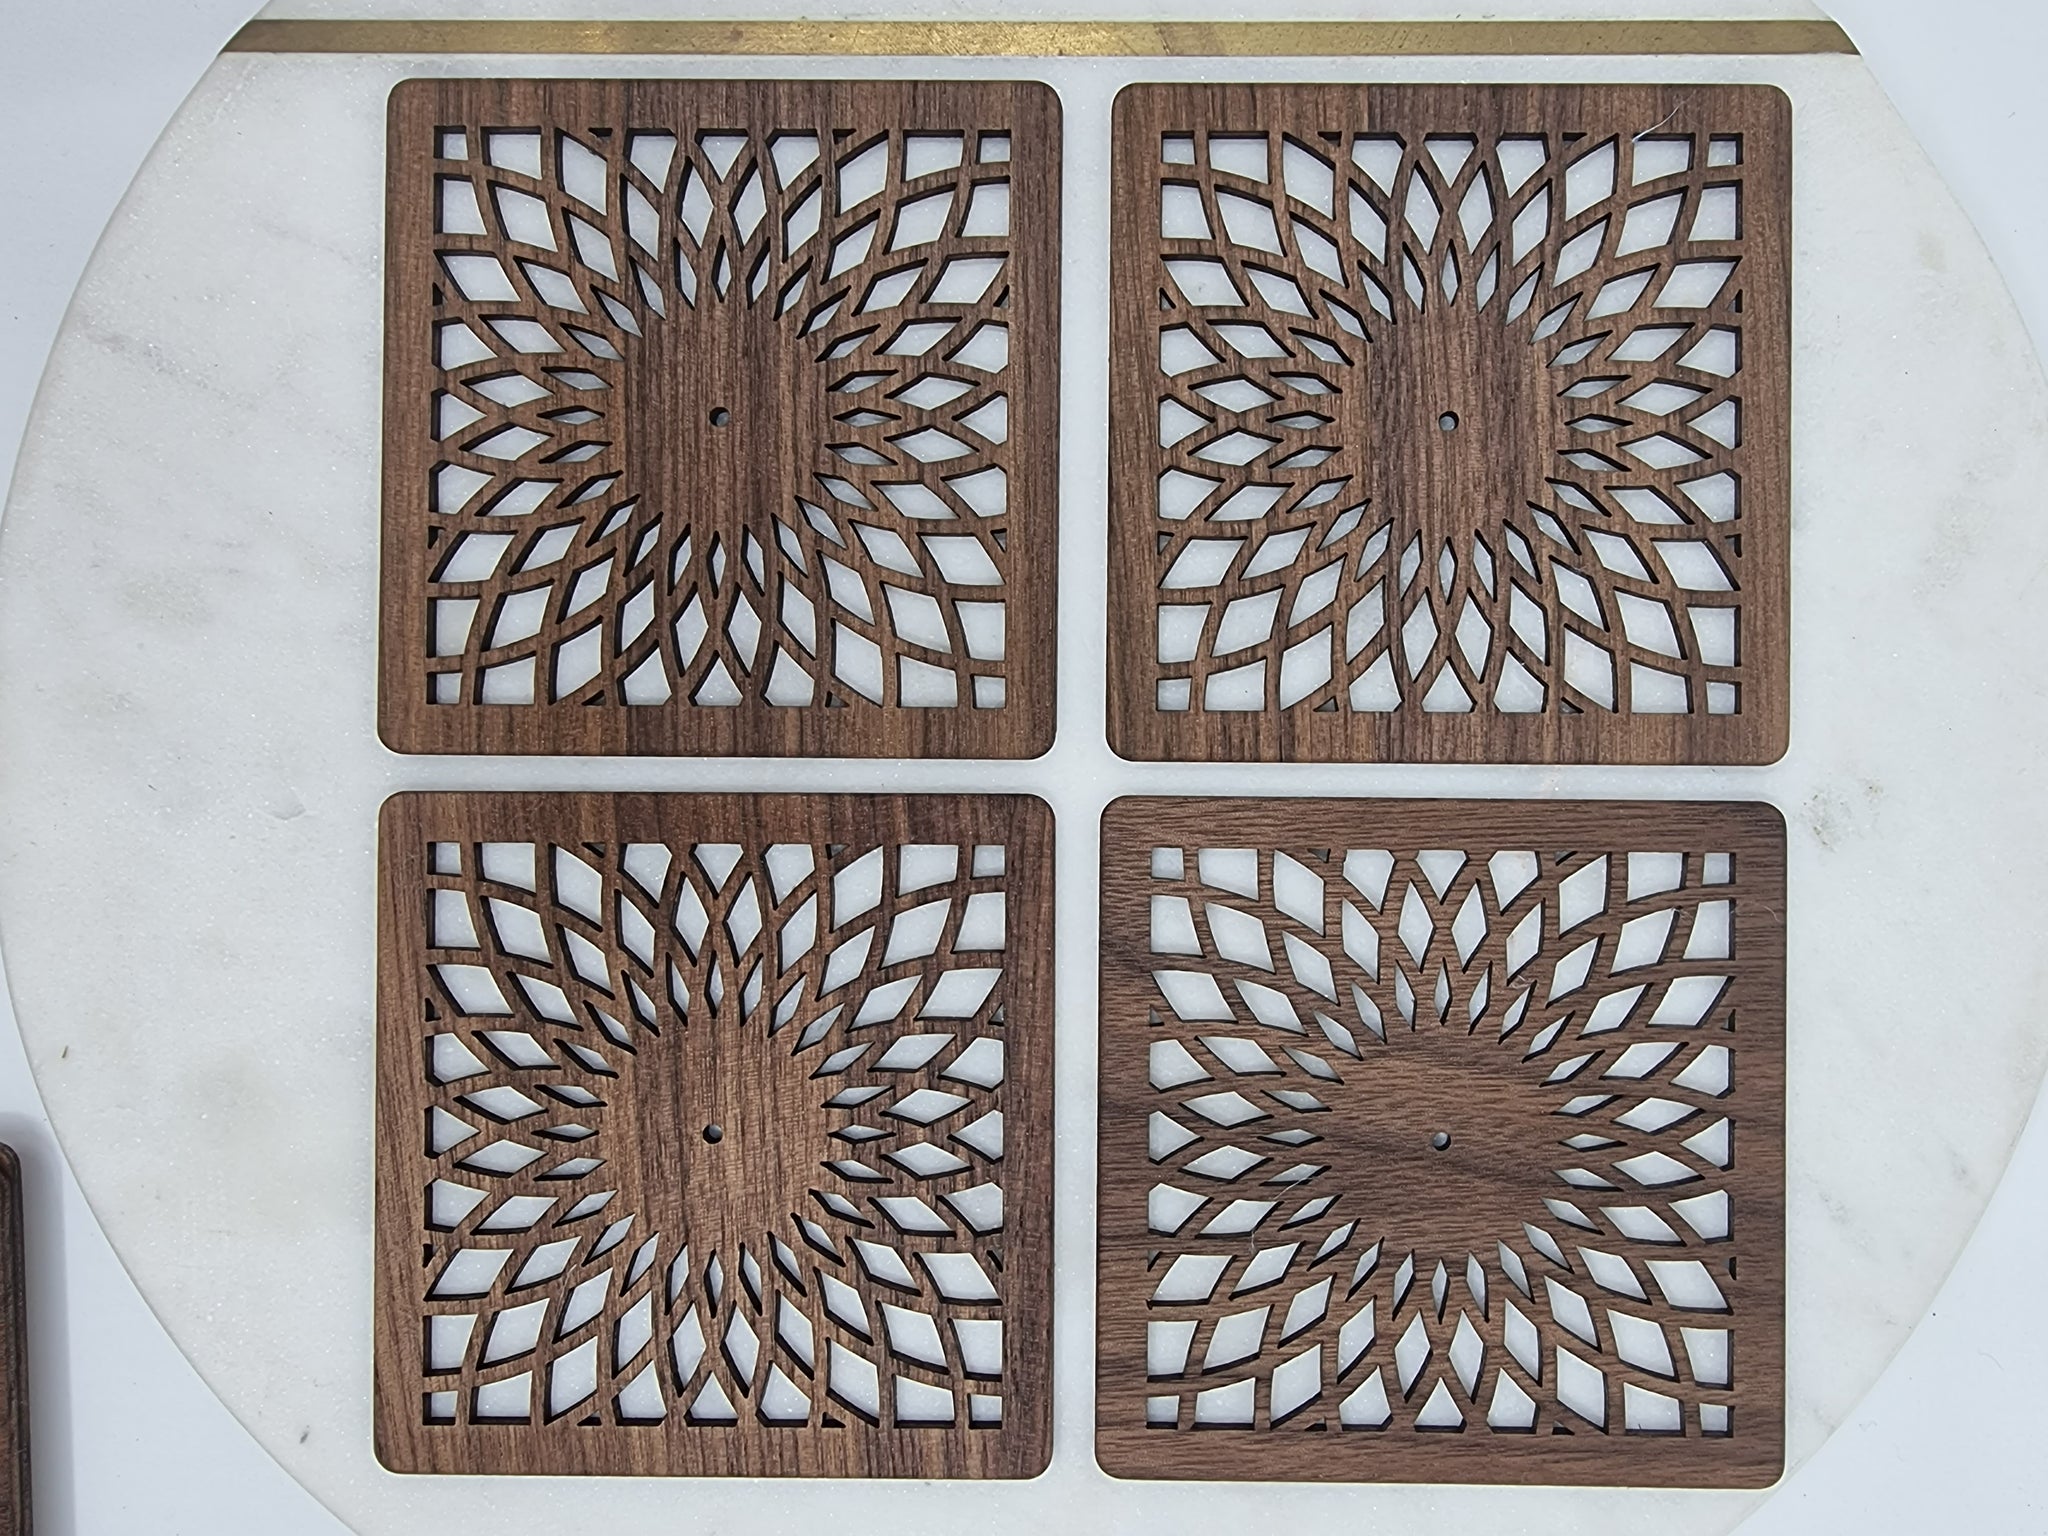 Four wooden coasters